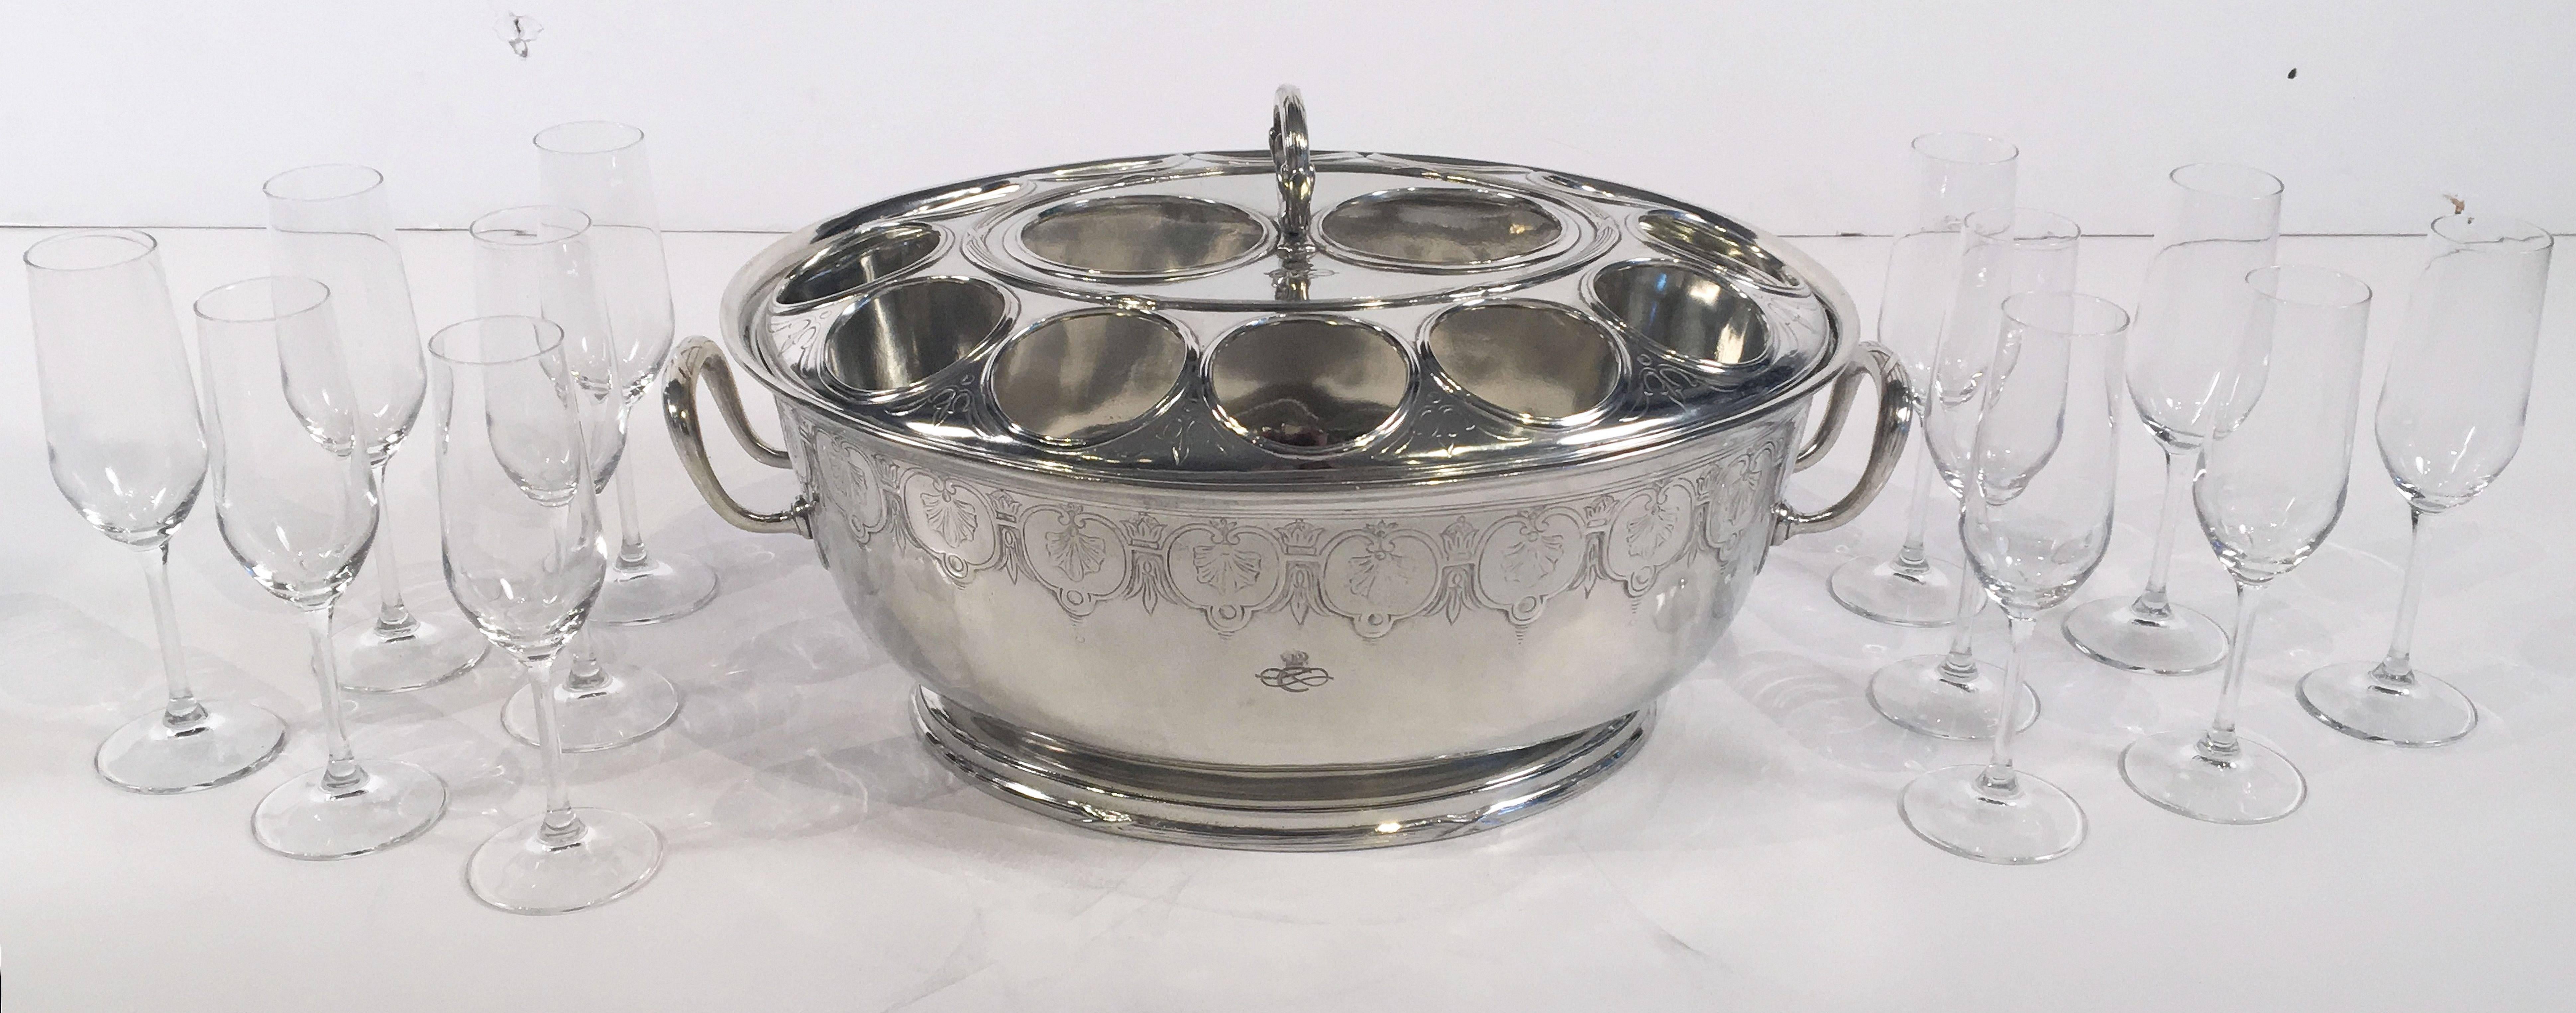 A fine Italian champagne service from the Collezione Italia Navigazione, a fleet of Italian luxury passenger ships that operated in the 1920s and 1930s. Featuring a fitted chased top with handle over an oval deep footed bowl, of alpaca silver plate,